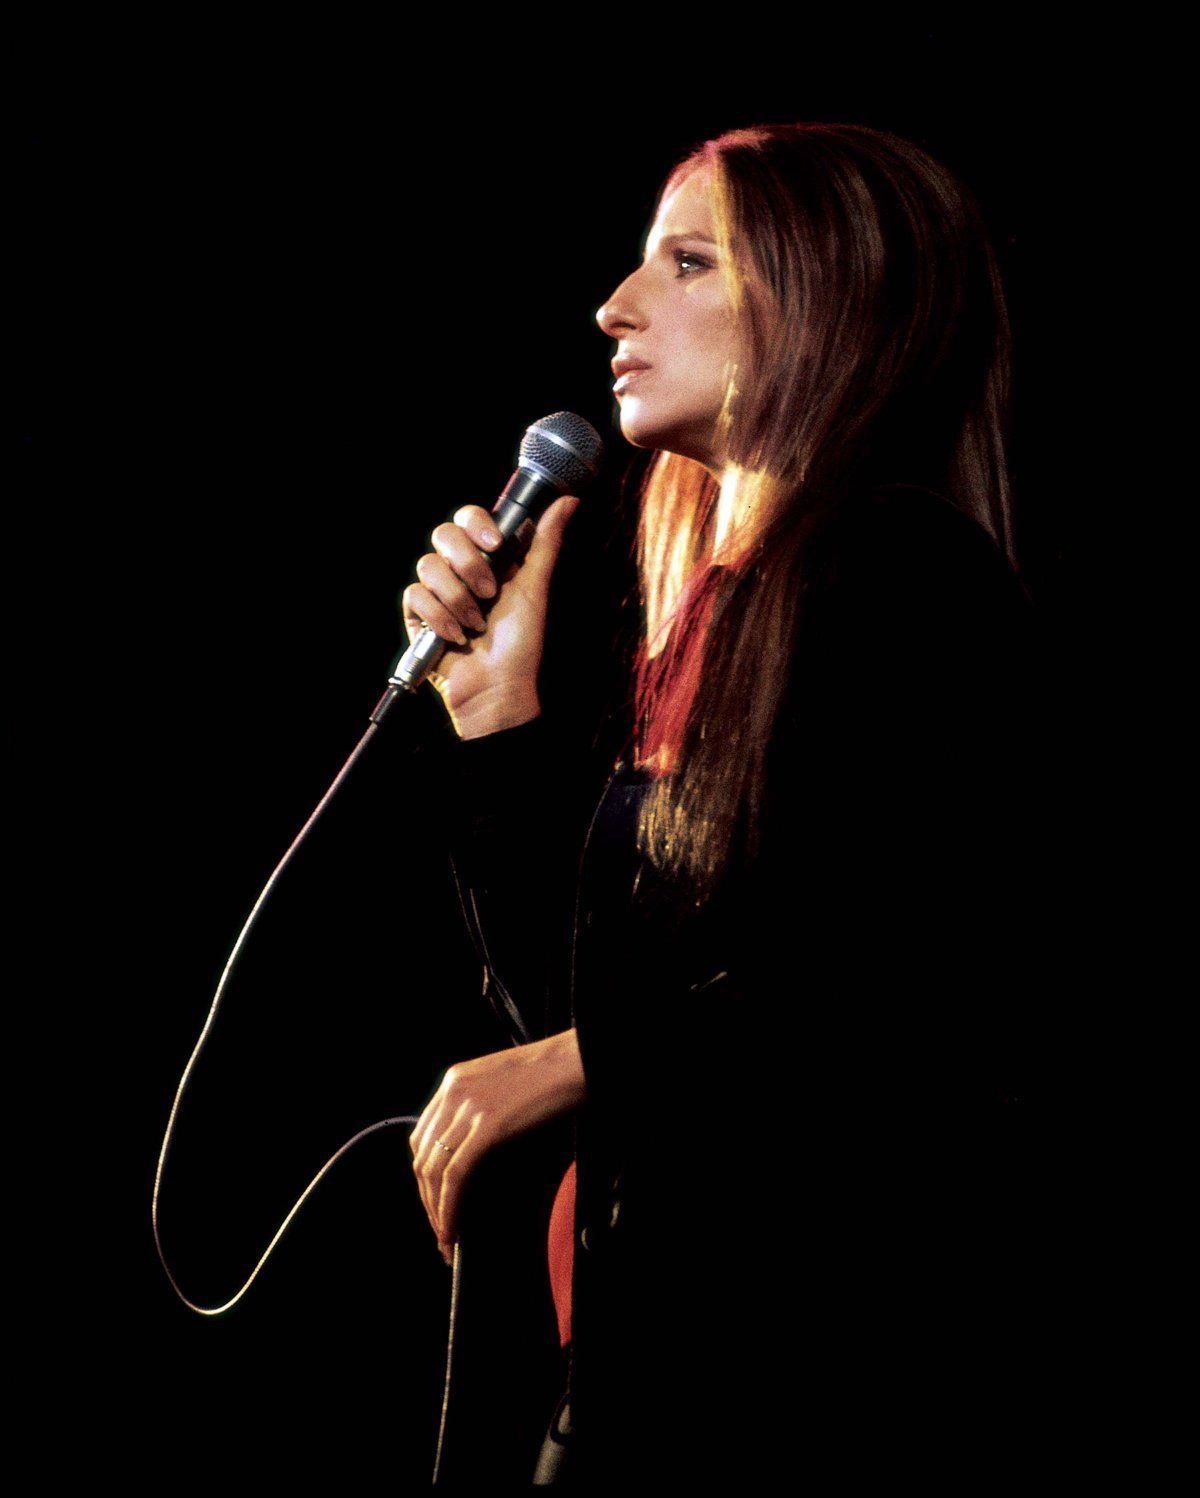 Barbra Streisand in profile, singing for McGovern at the Forum, 1972.